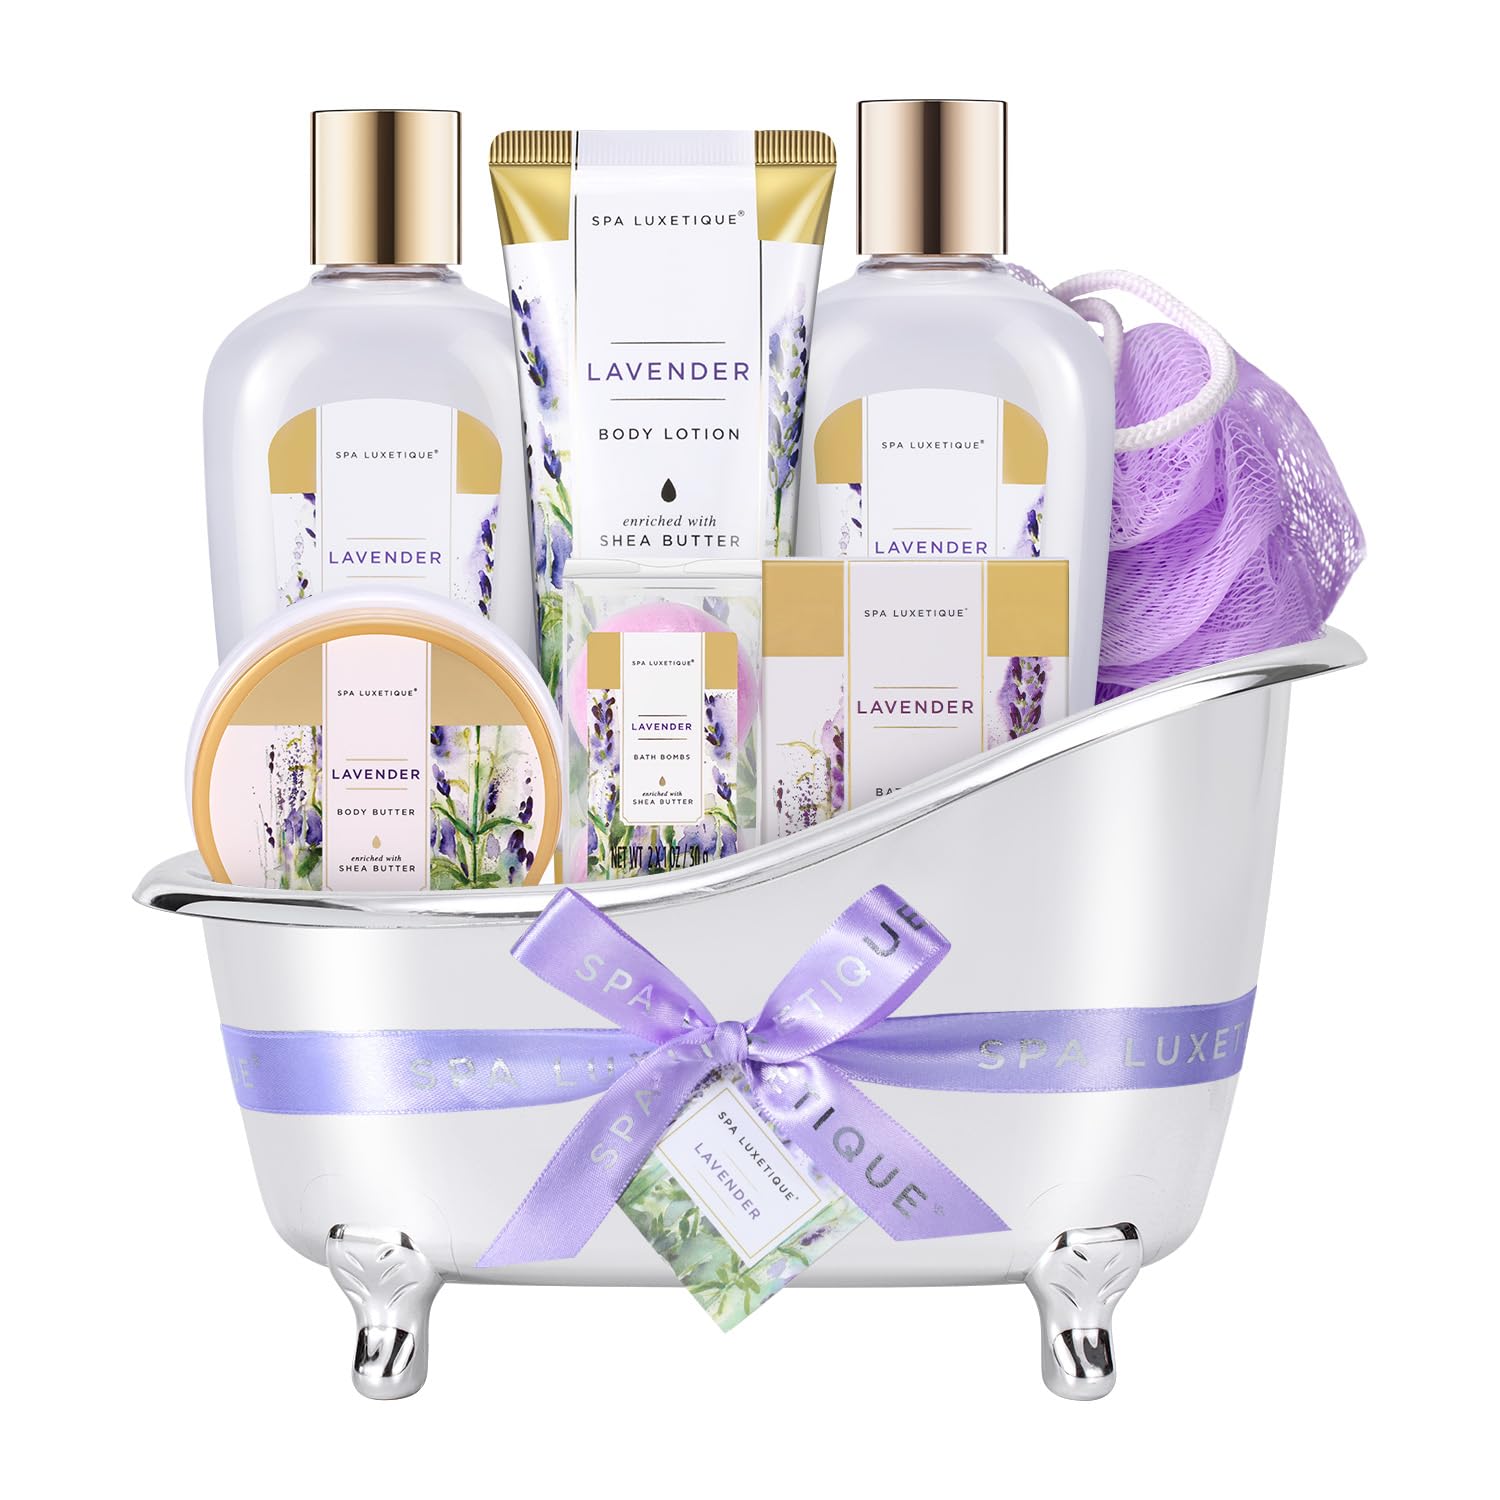 Bath Baskets for Women Gift, Home Spa Kit for Women, Spa Luxetique Lavender Bath Set with Body Lotion, Bath Salt, Bath Bombs, Relaxation Bath Gifts for Women Mothers Day Gifts